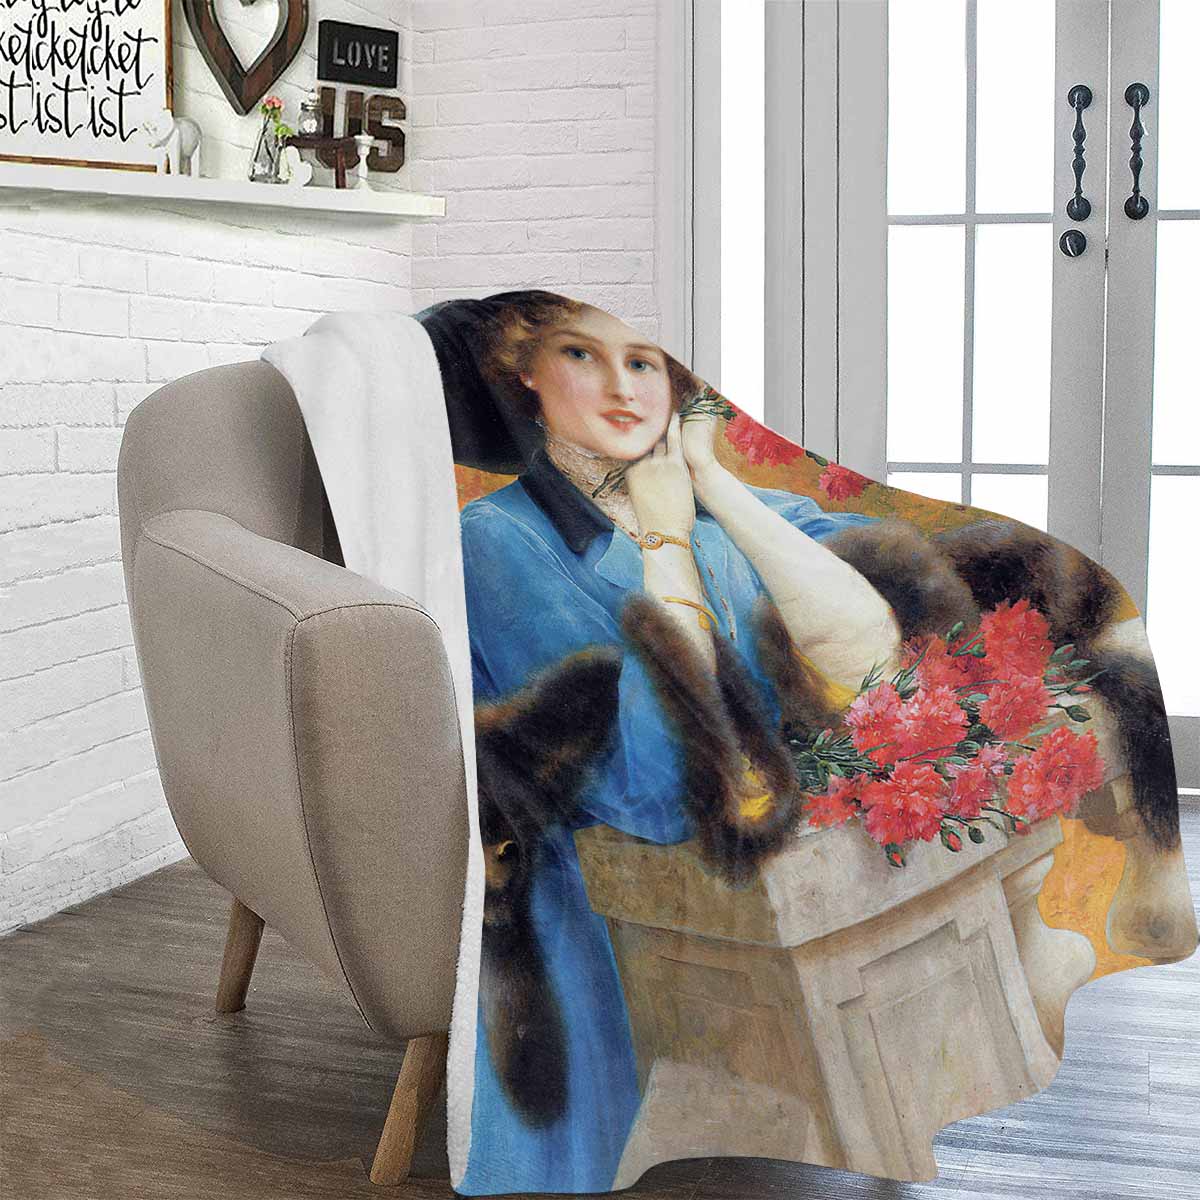 Victorian Lady Design BLANKET, LARGE 60 in x 80 in, CARNATIONS ARE FOR LOVE